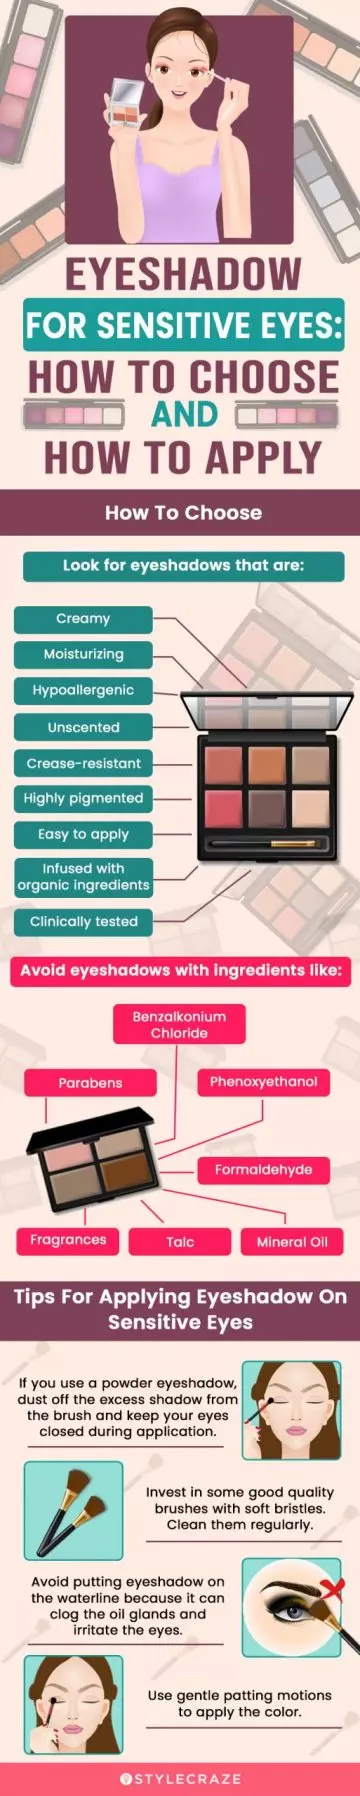 Eyeshadow For Sensitive Eyes: How To Choose & How To Apply (infographic)